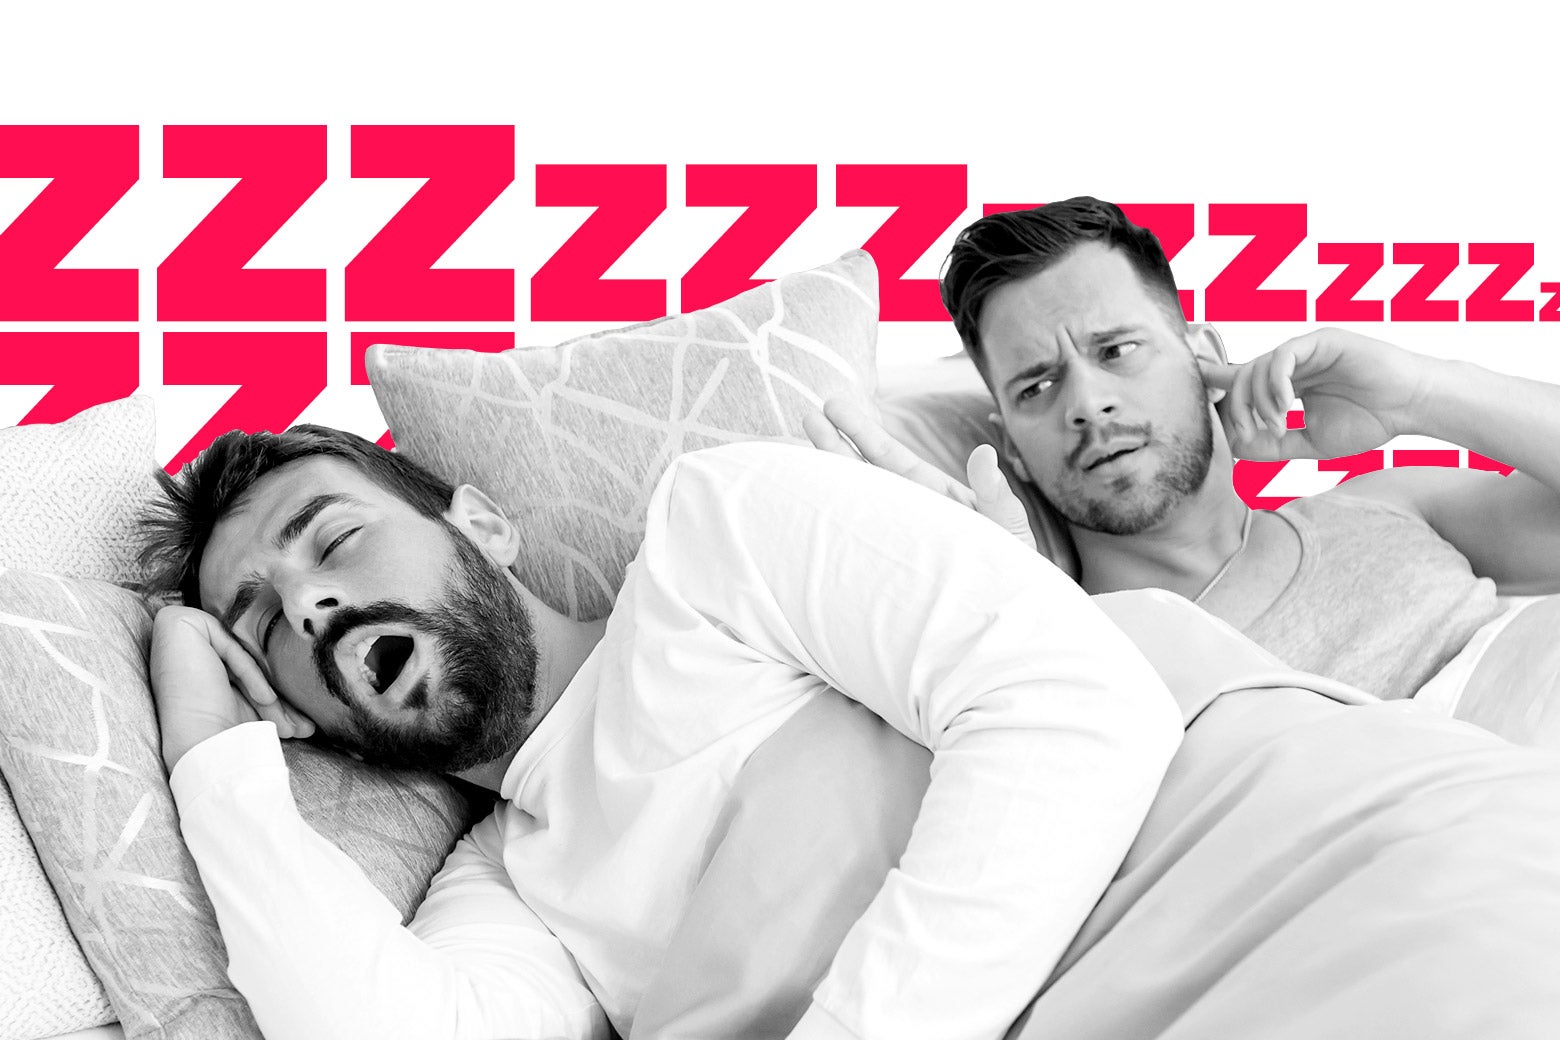 Two men in bed, one plugging one ear and reaching out to his partner who is loudly snoring